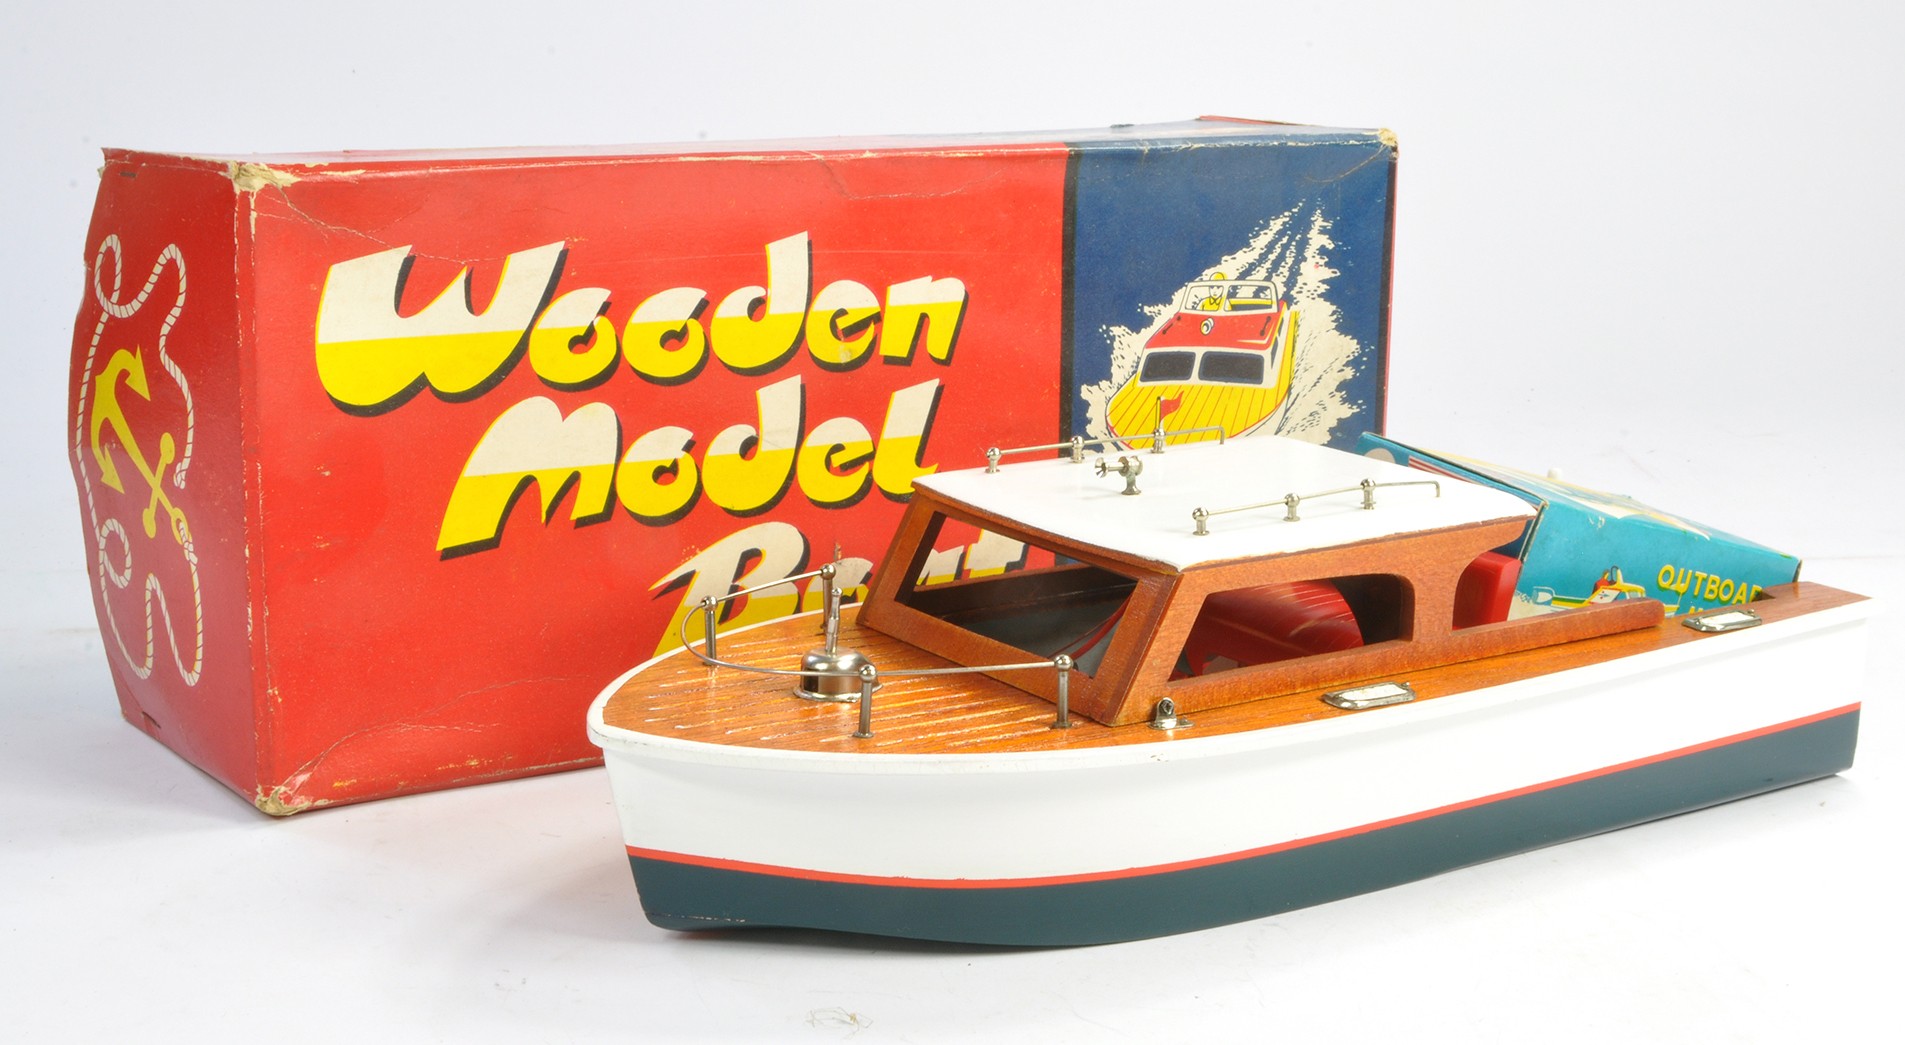 Union (Japan) Wooden Model boat complete with outboard motor (in